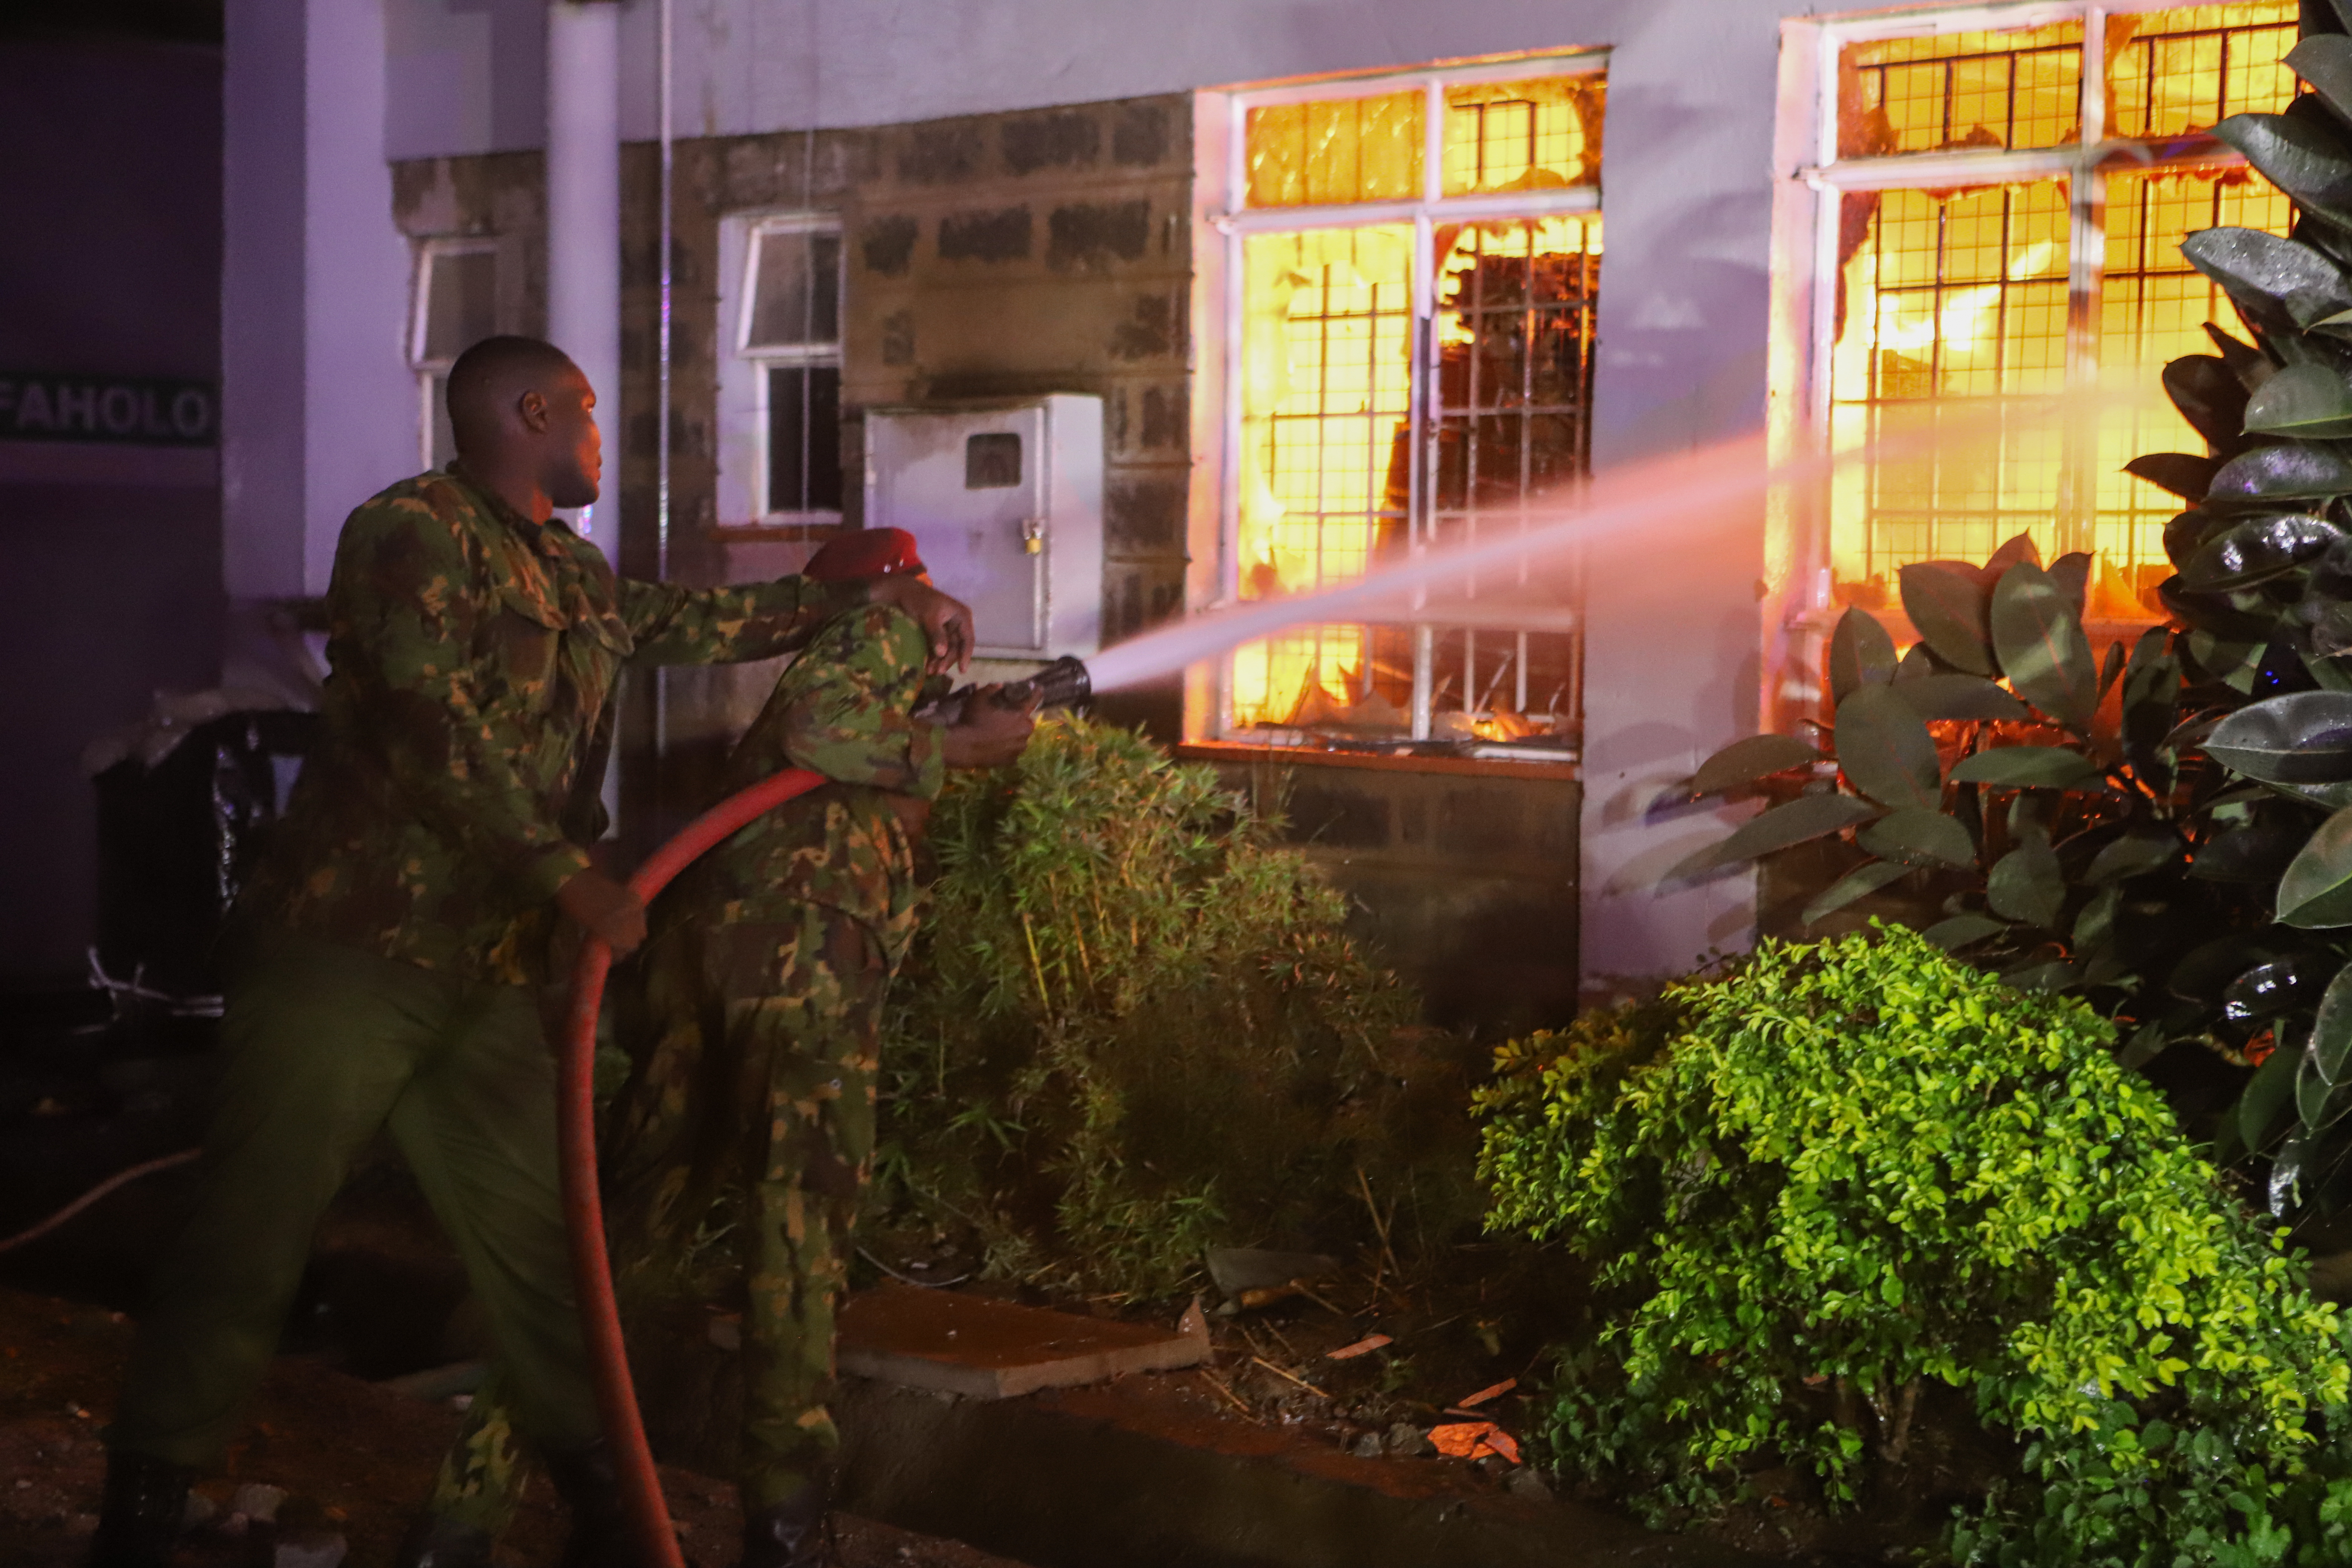 Firefighters were seen putting out the fires that had broke through into buildings